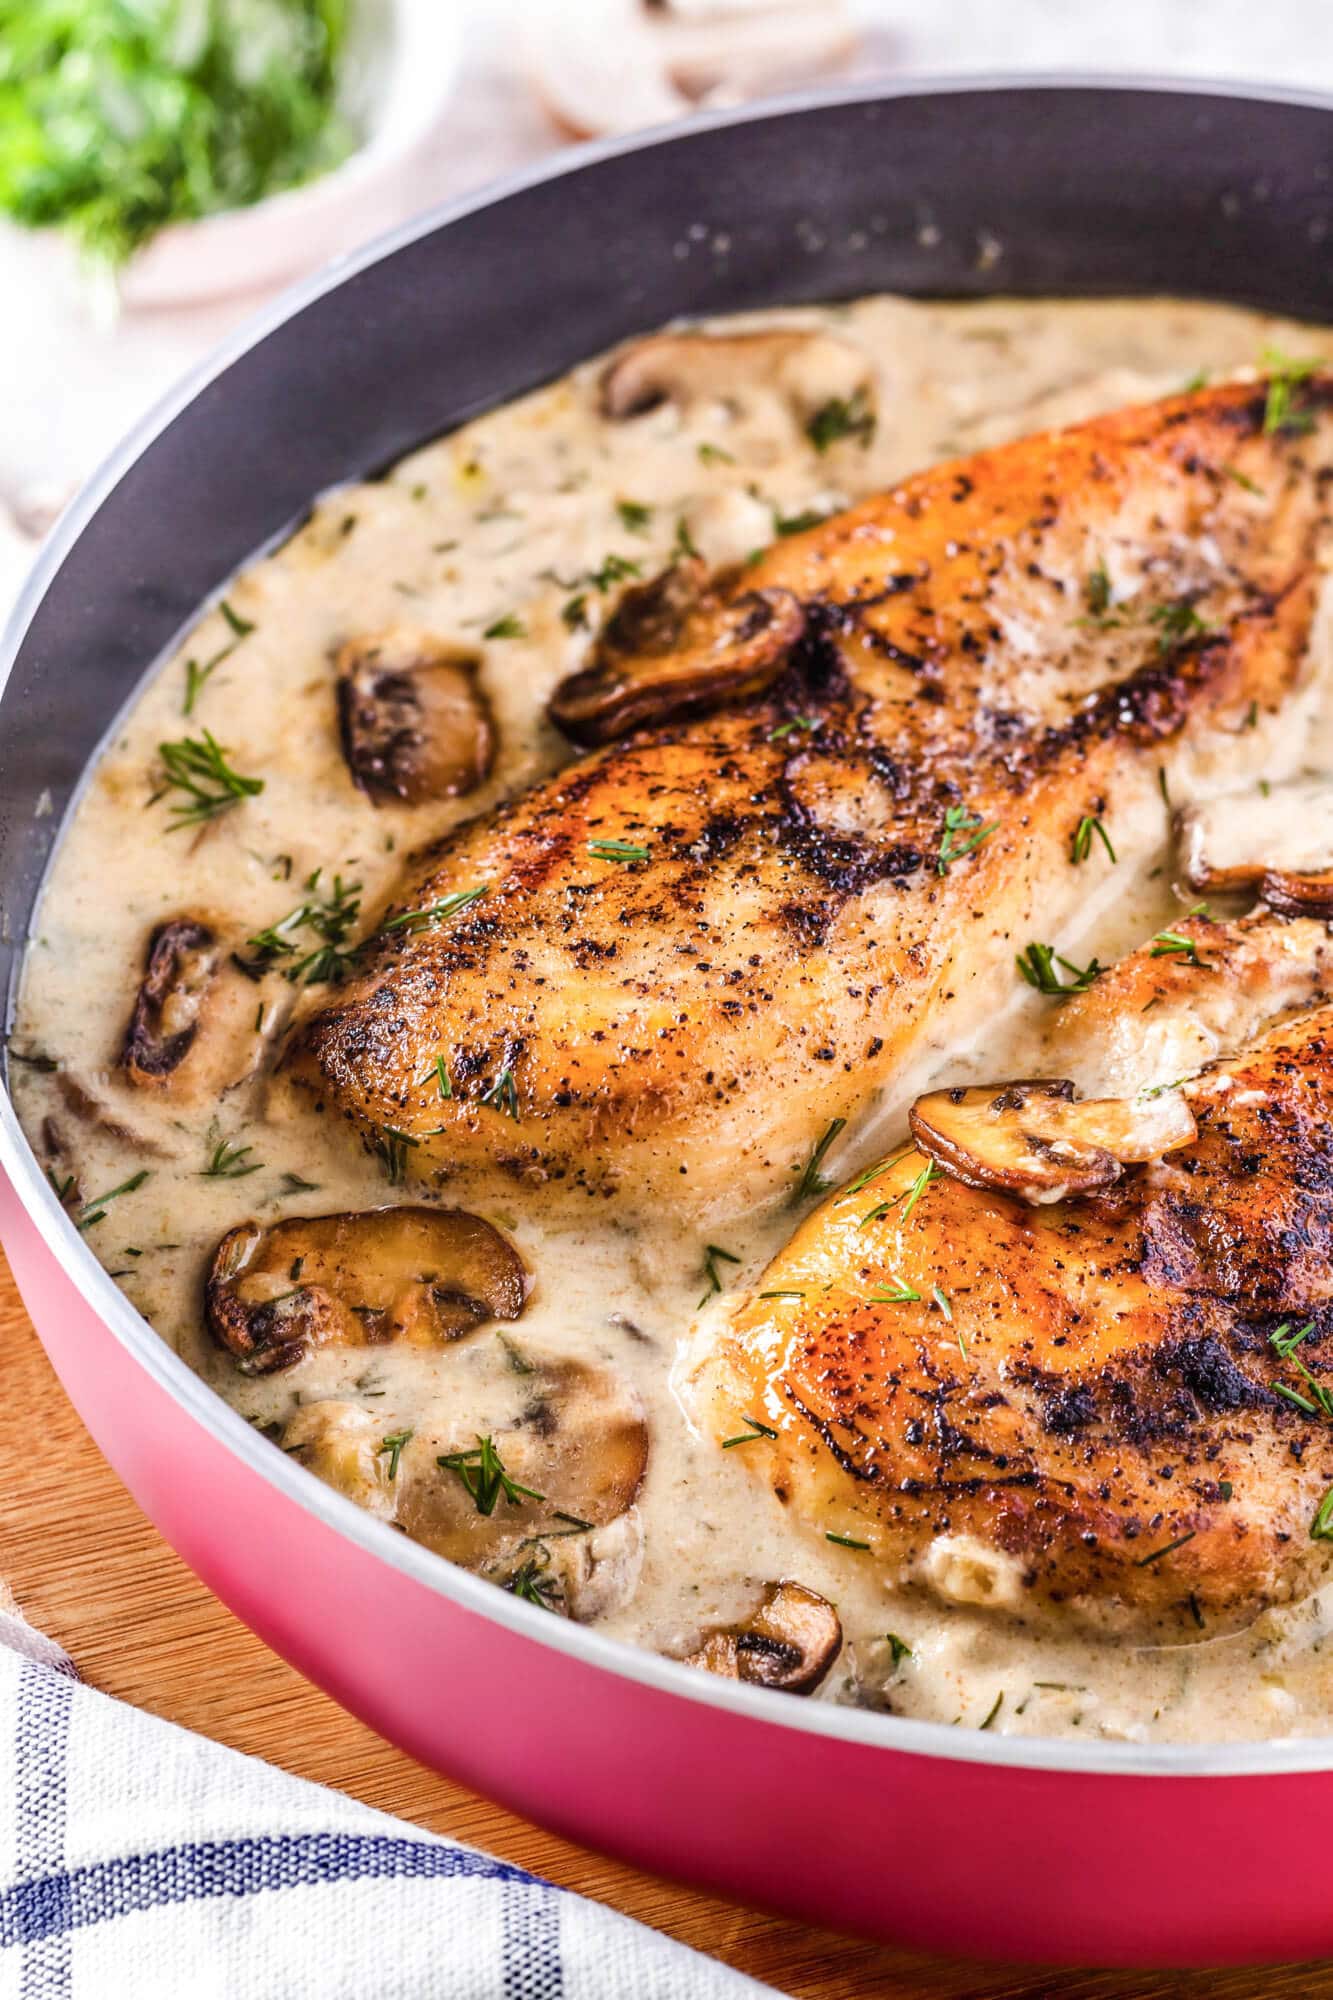 cooked-chicken-breast-in-a-red-pan-on-a-cutting-board-with-creamy-mushroom-sauce-fresh-dill